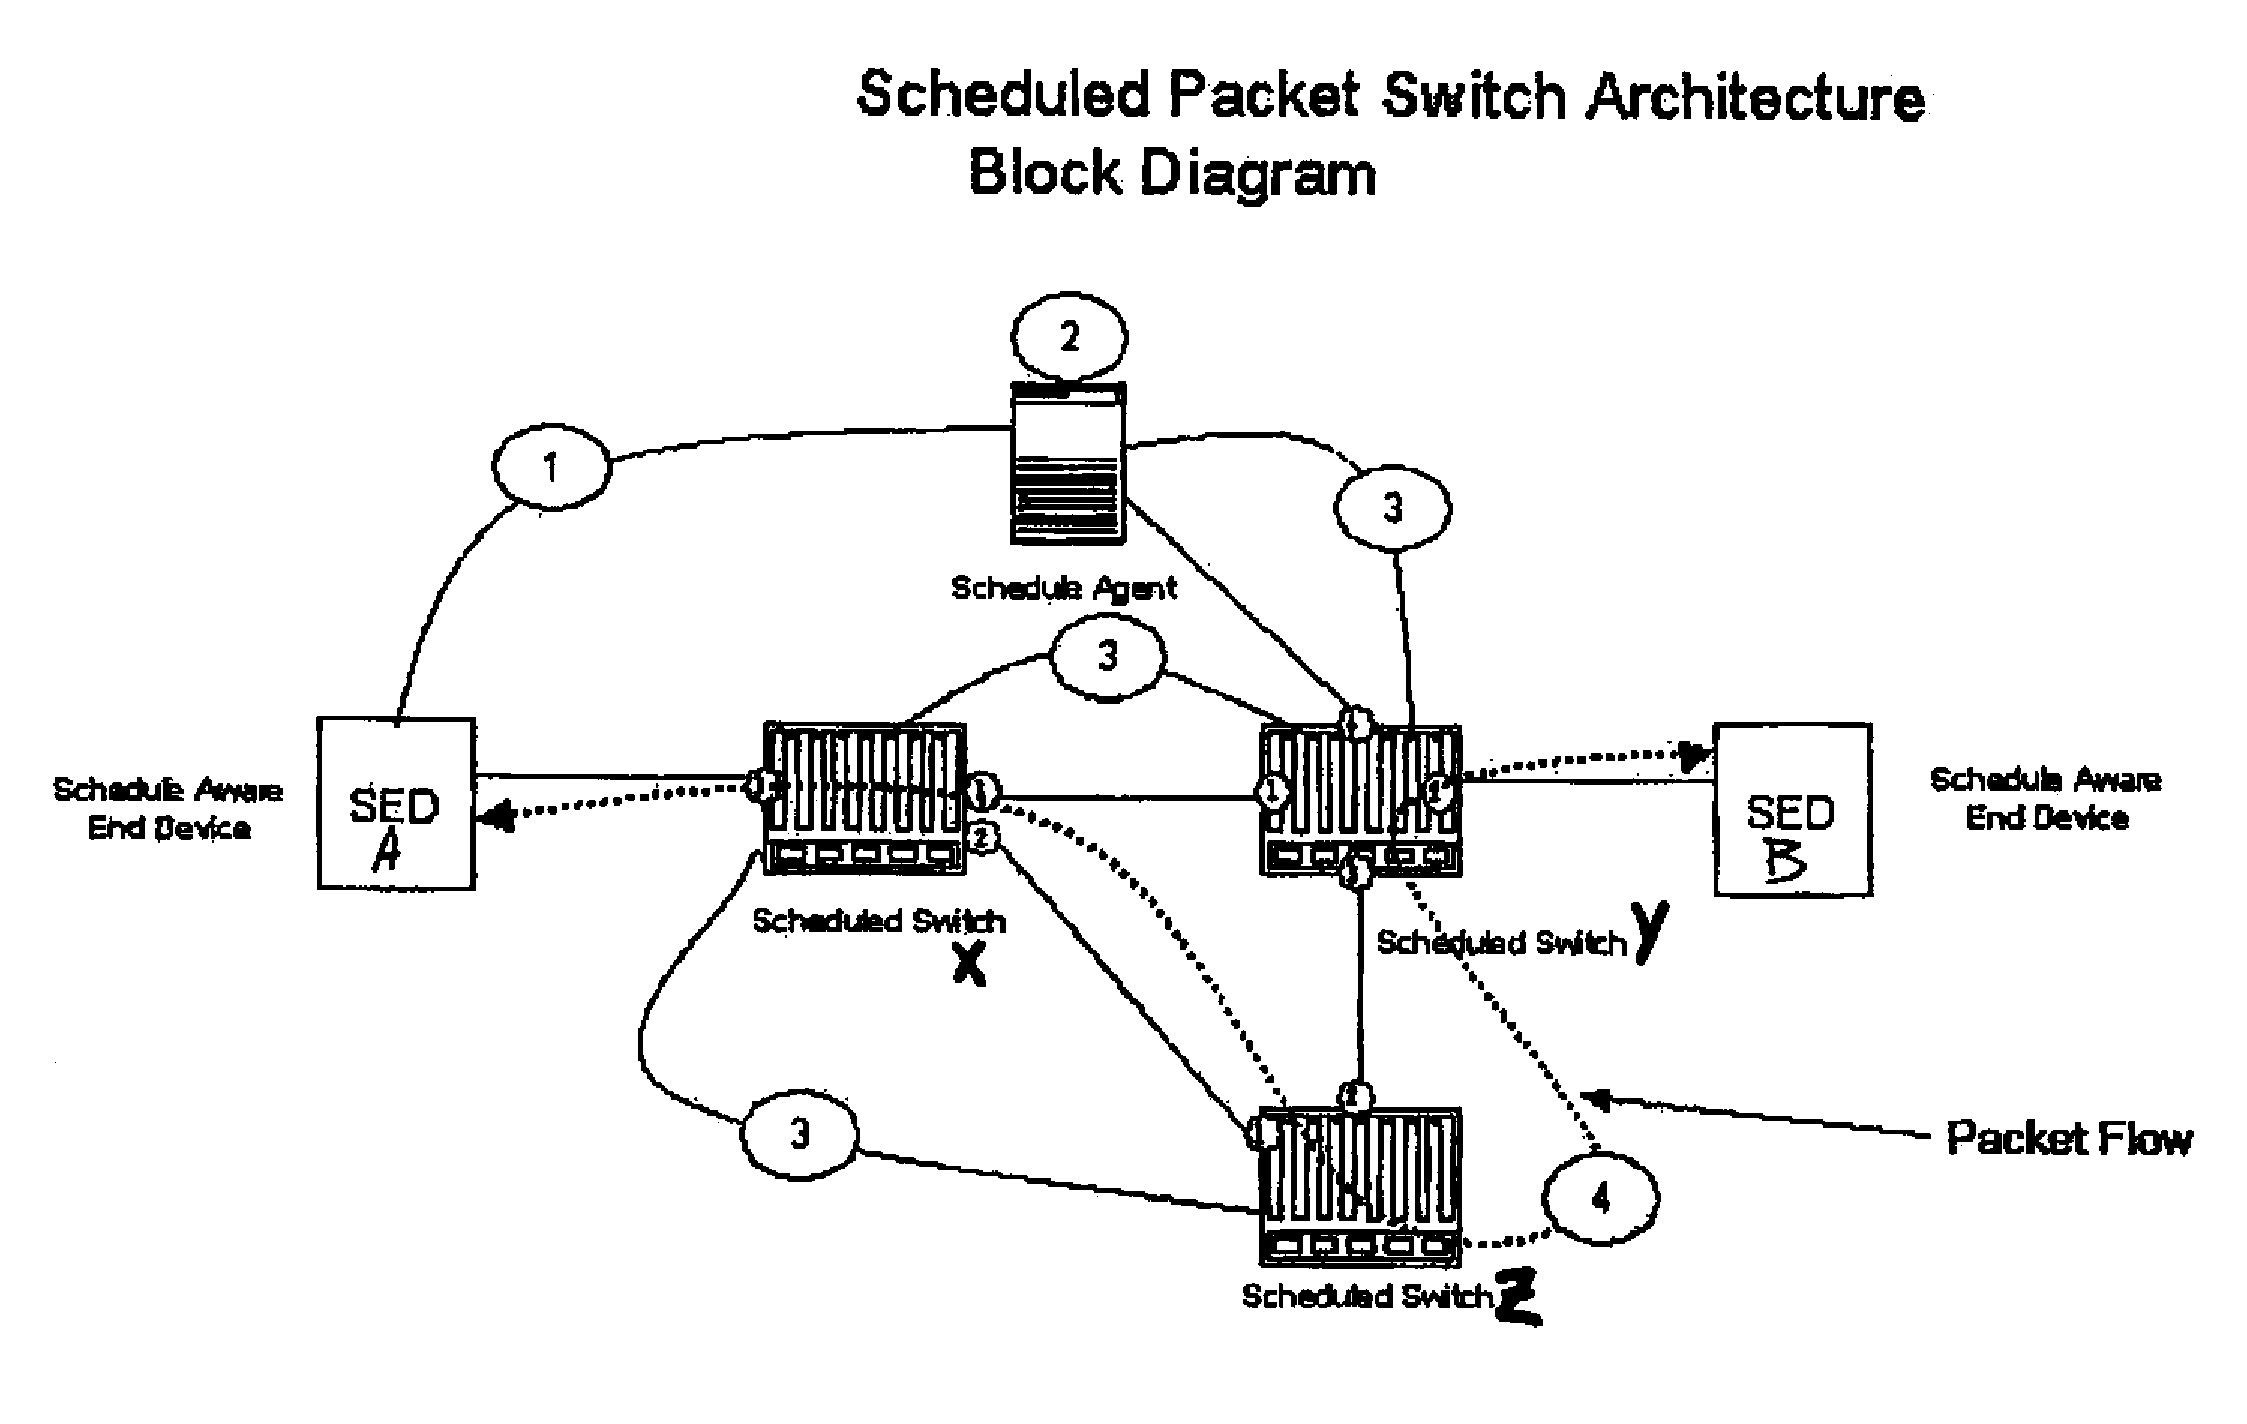 Method for achieving high-availability of itineraries in a real-time network scheduled packet routing system